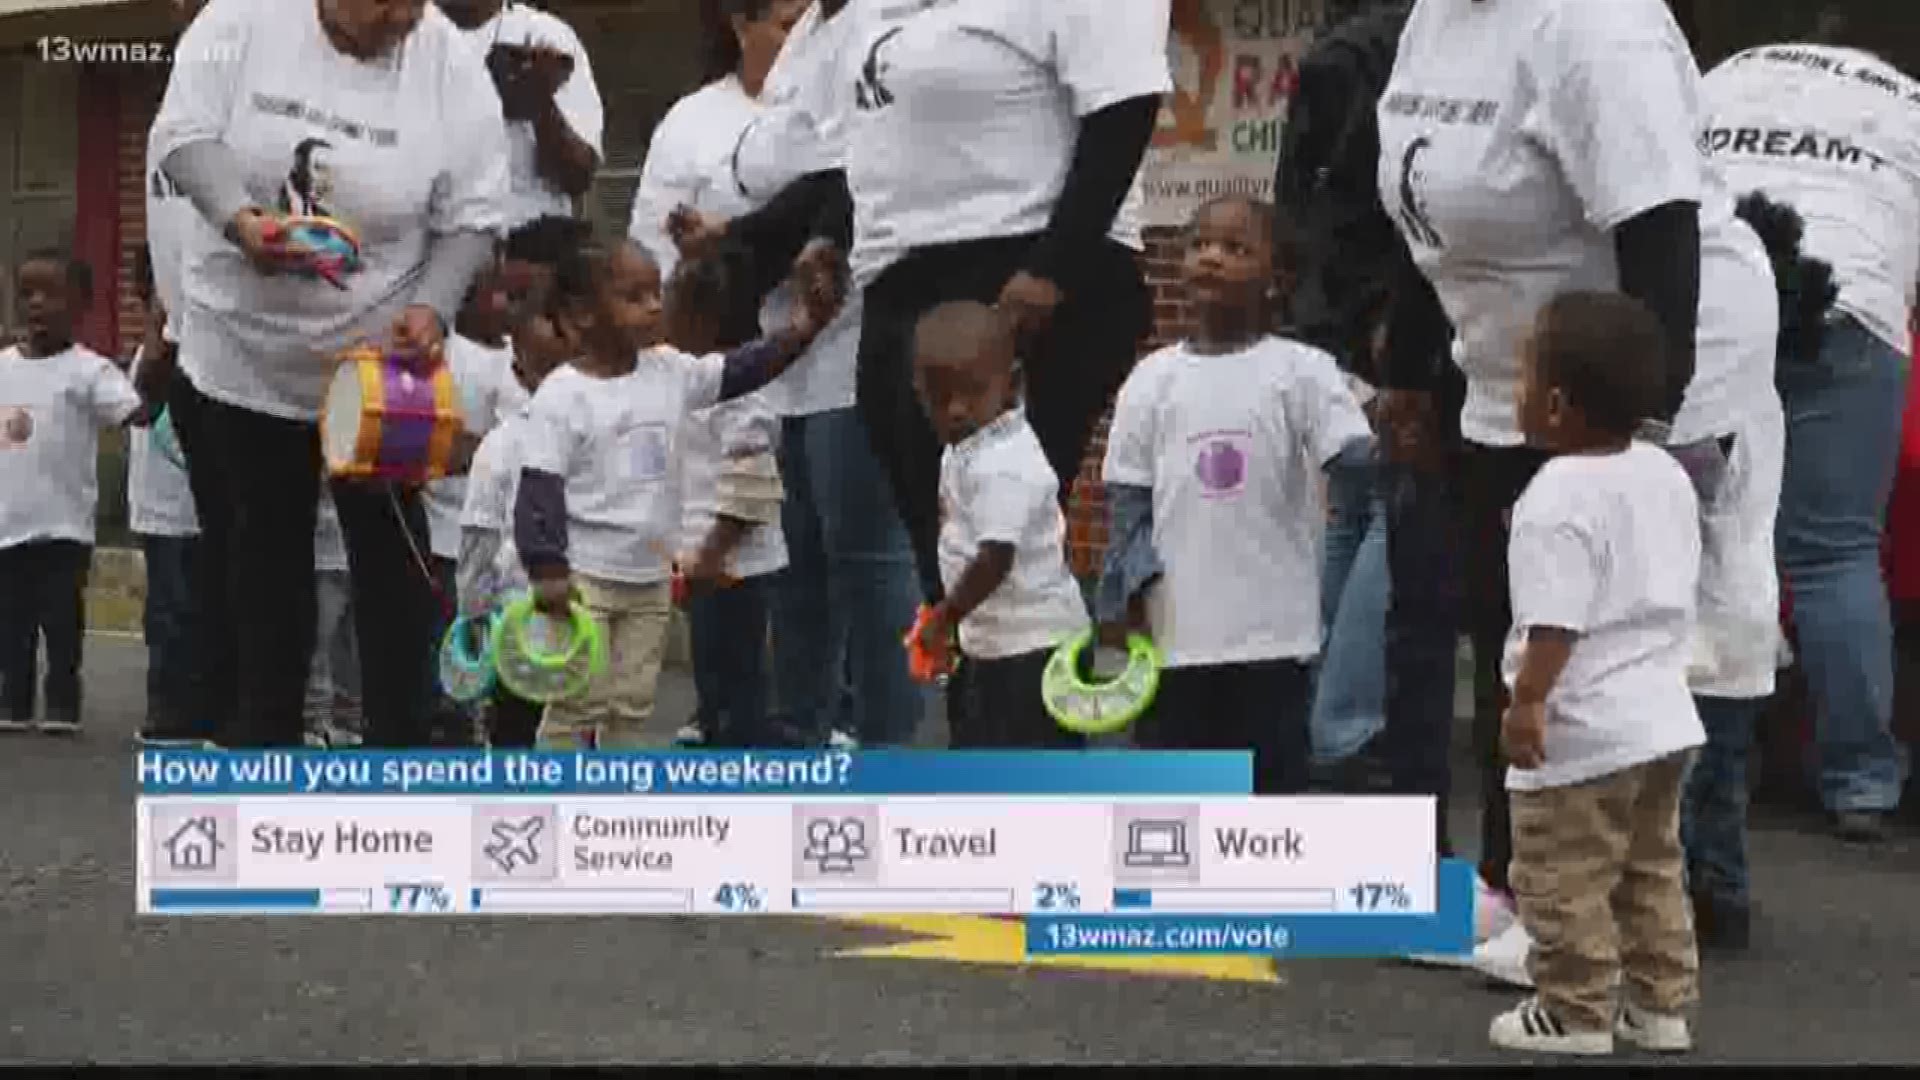 Daycare center marches to honor Dr. King